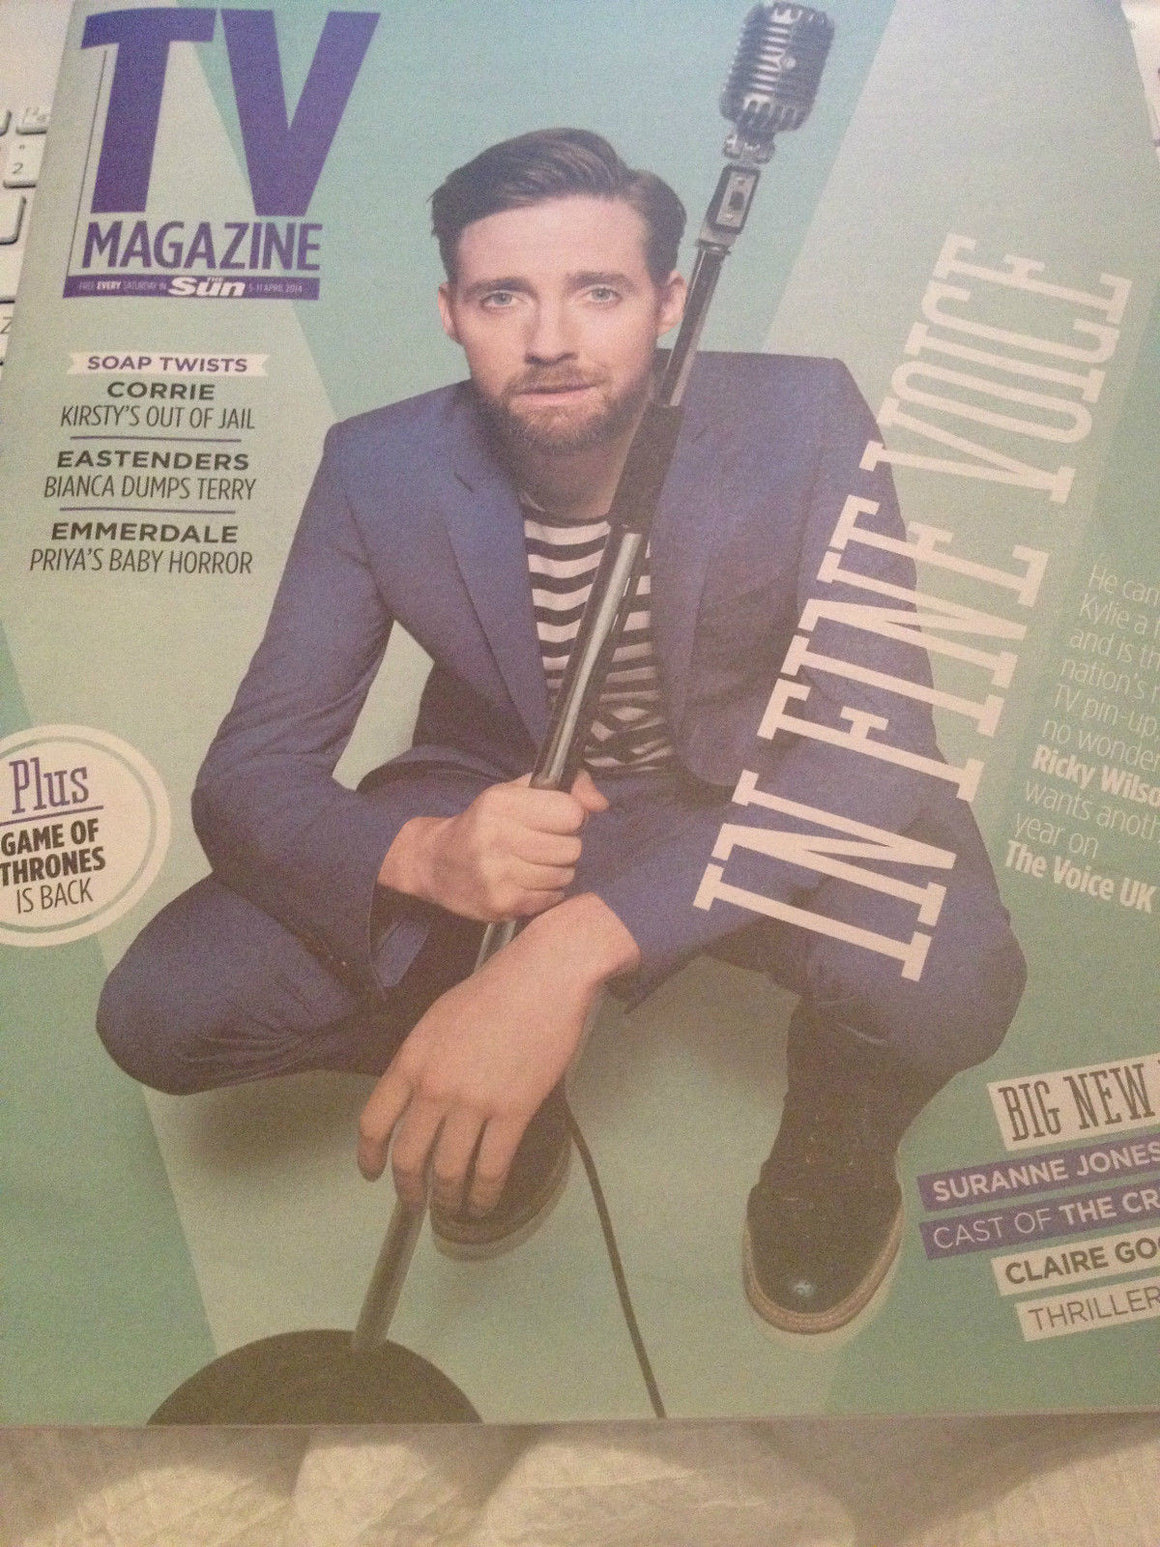 Kaiser Chiefs RICKY WILSON Photo Interview 2014 Magazine TOM DALEY CLAIRE GOOSE